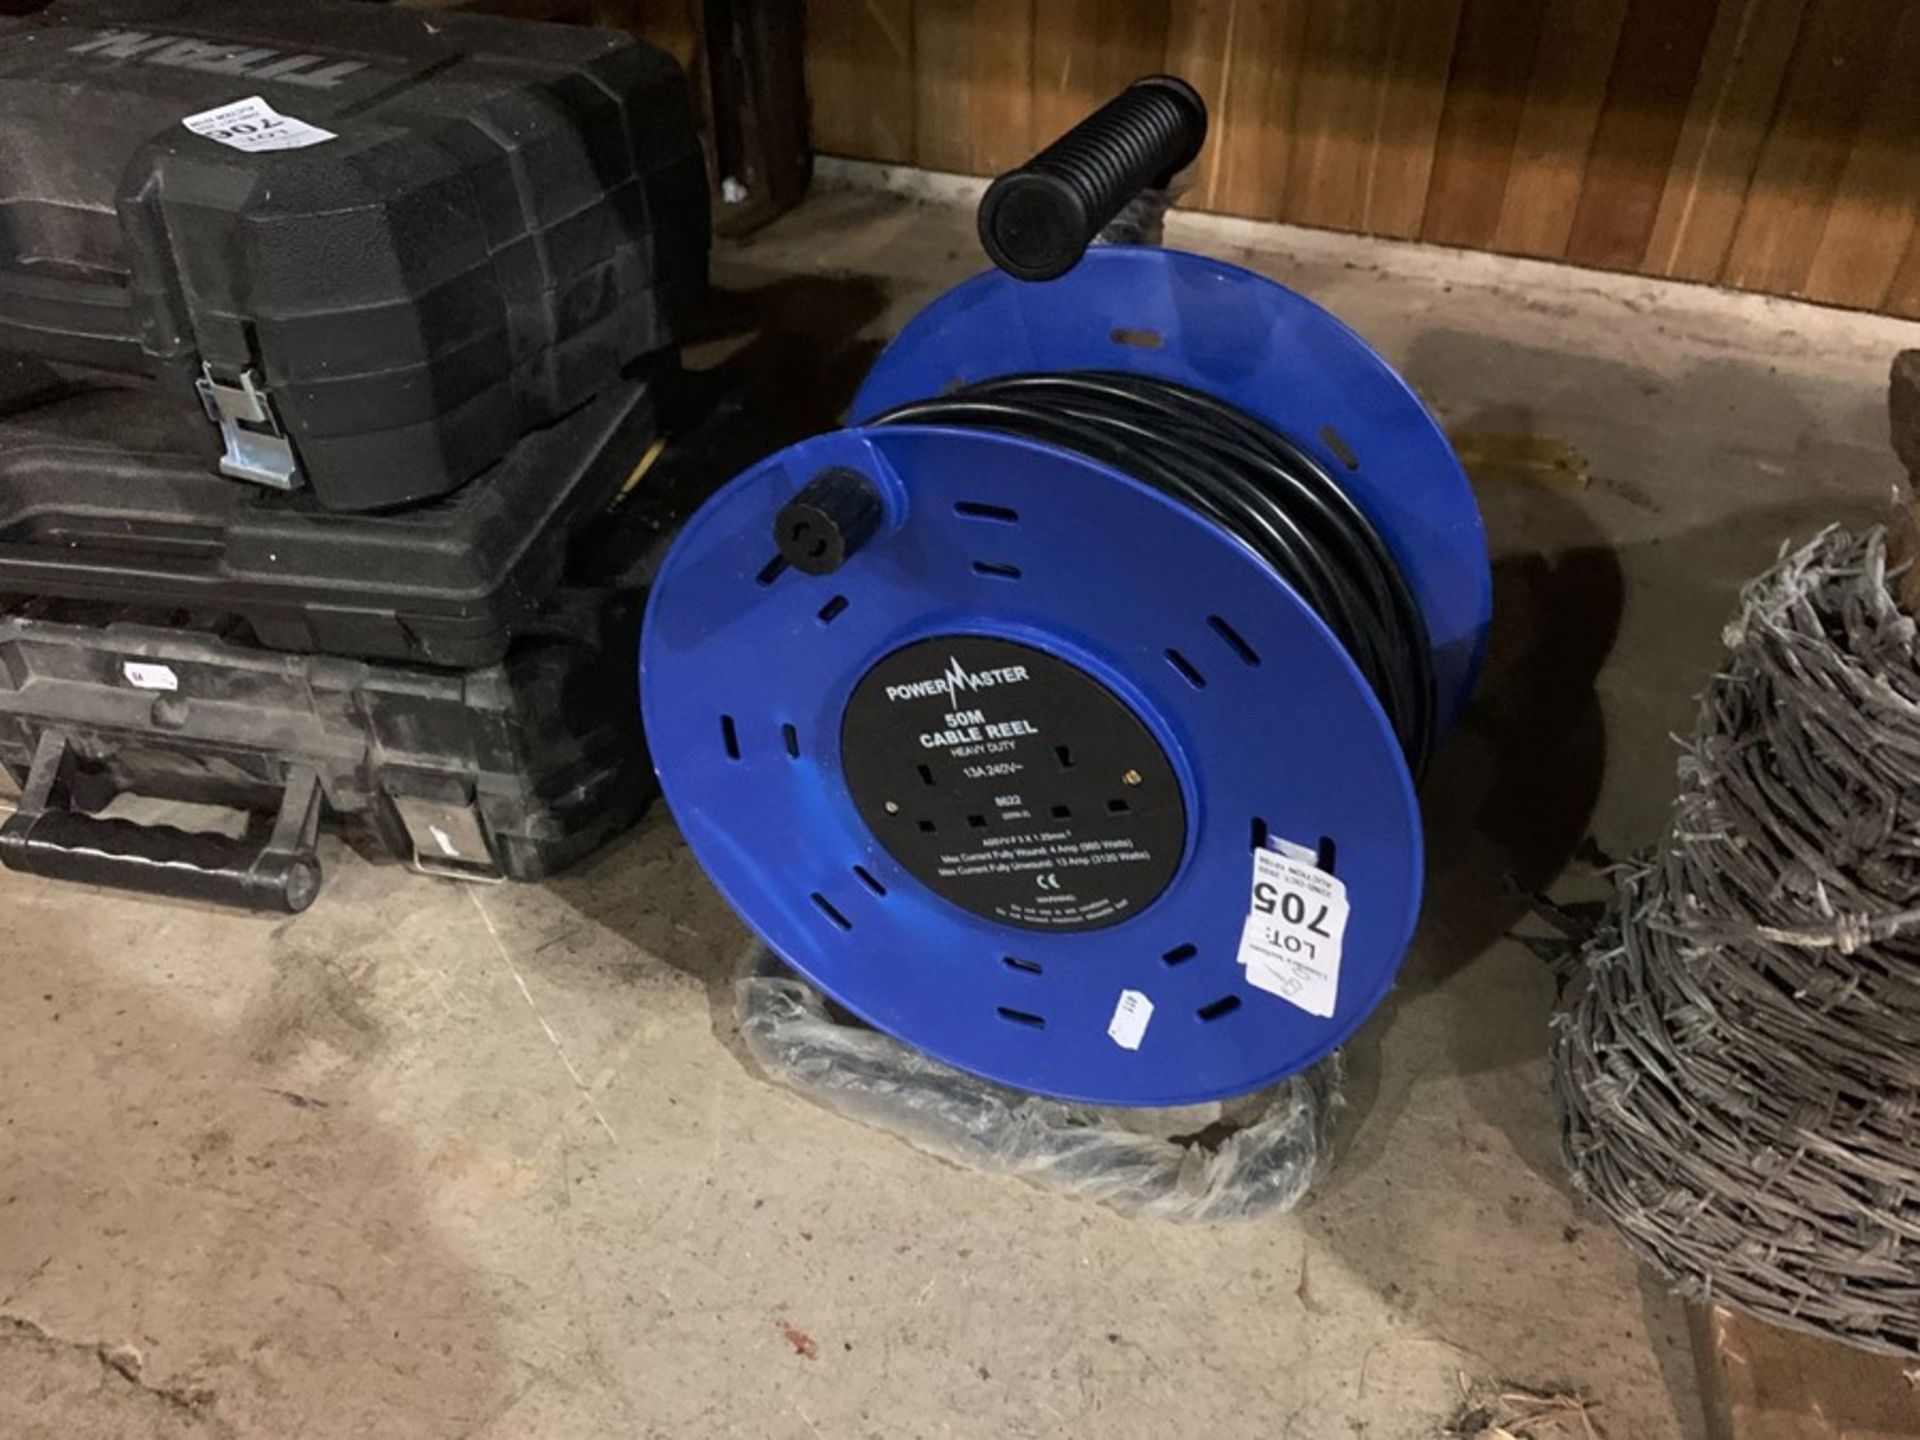 NEW 50M POWERMASTER CABLE EXTENSION REEL - Image 3 of 4